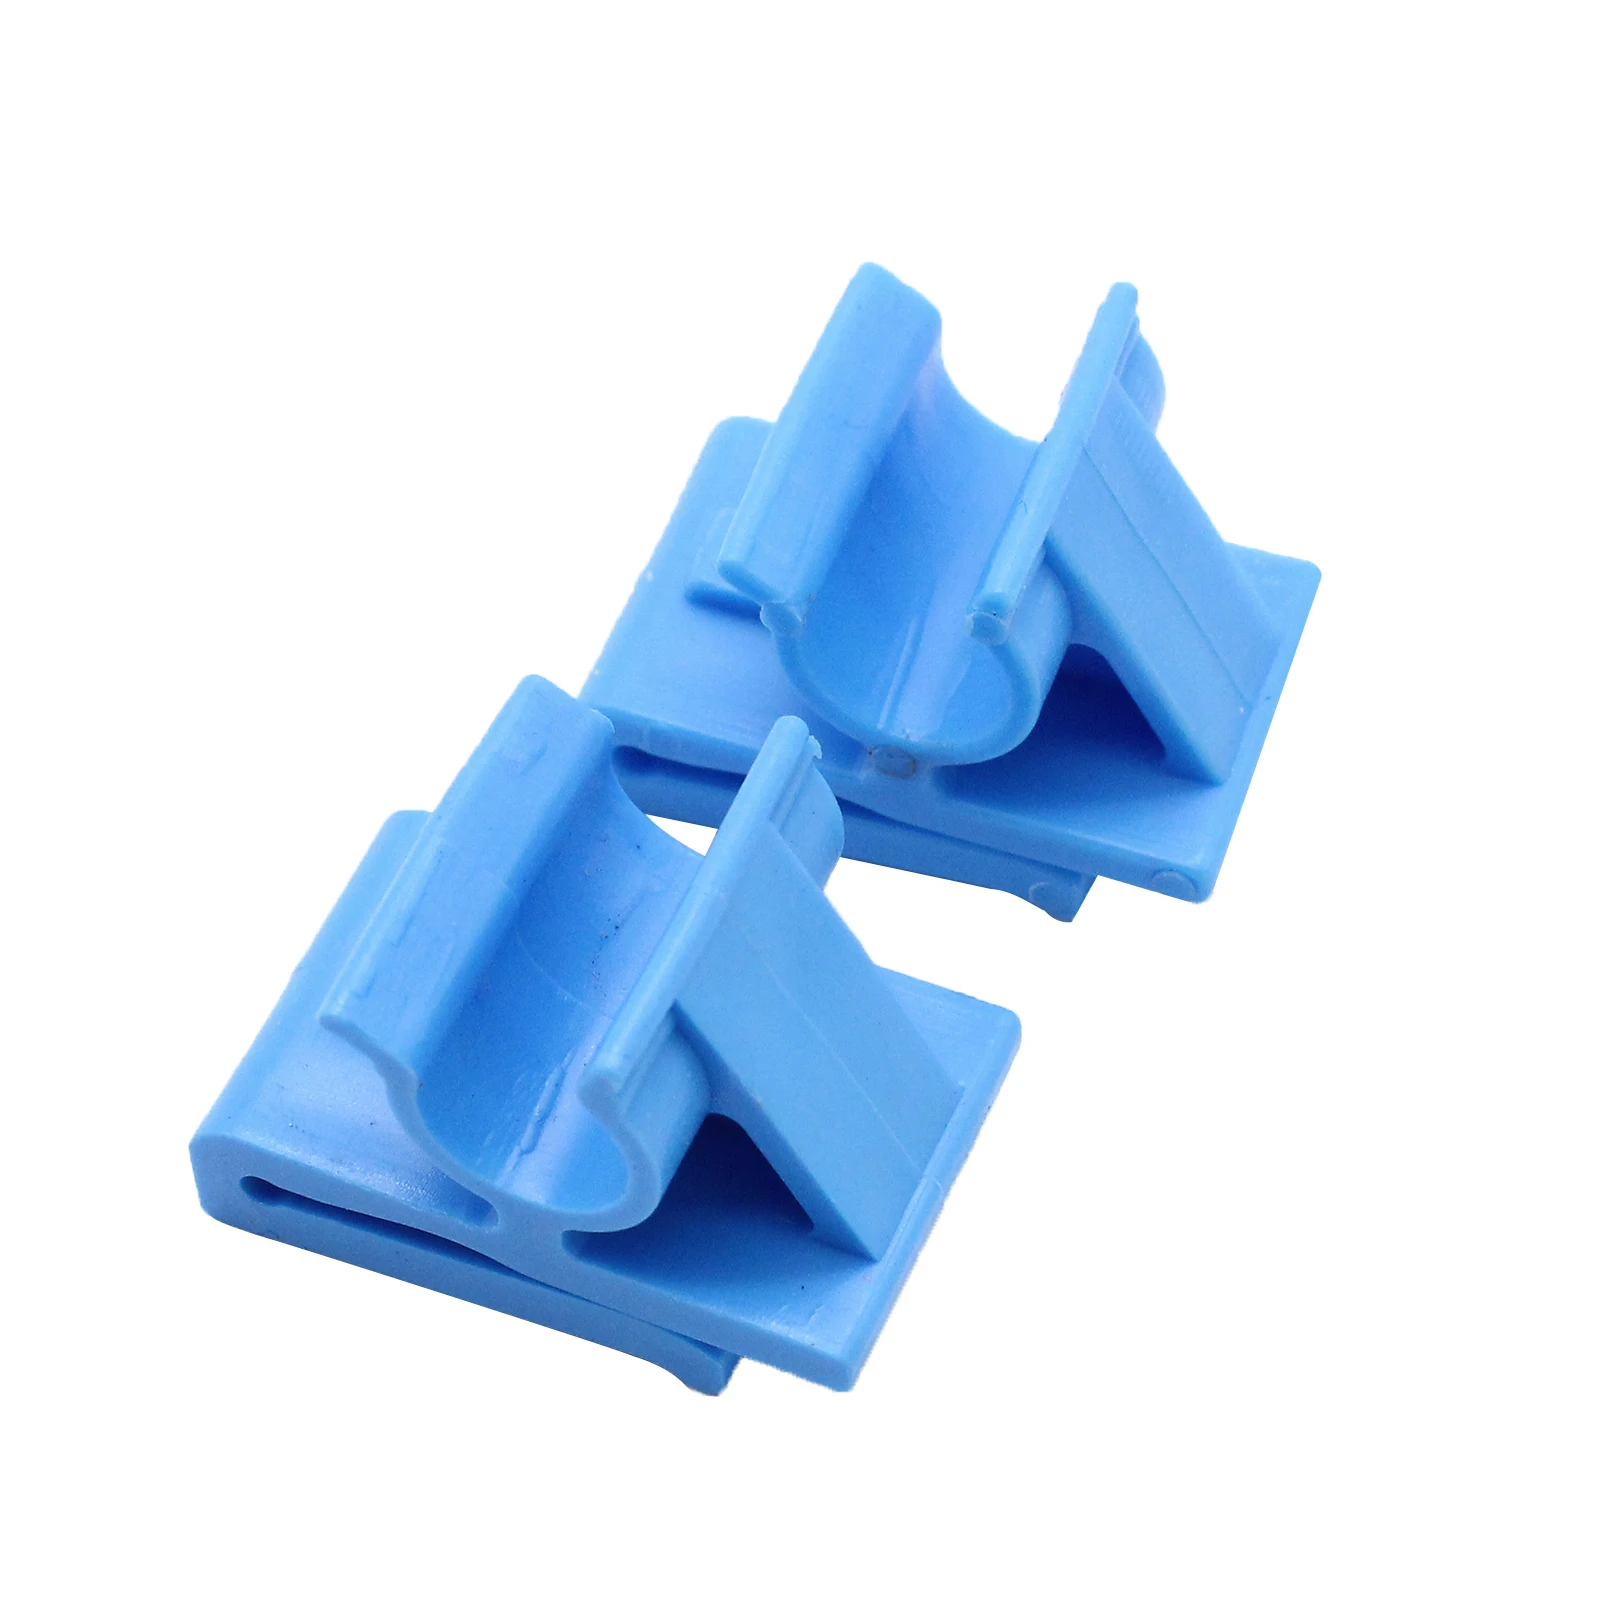 2 Pieces Blue Lower Glove Box Clips Fix Parts 92201416 for Holden Vehicle WL VY Commodore